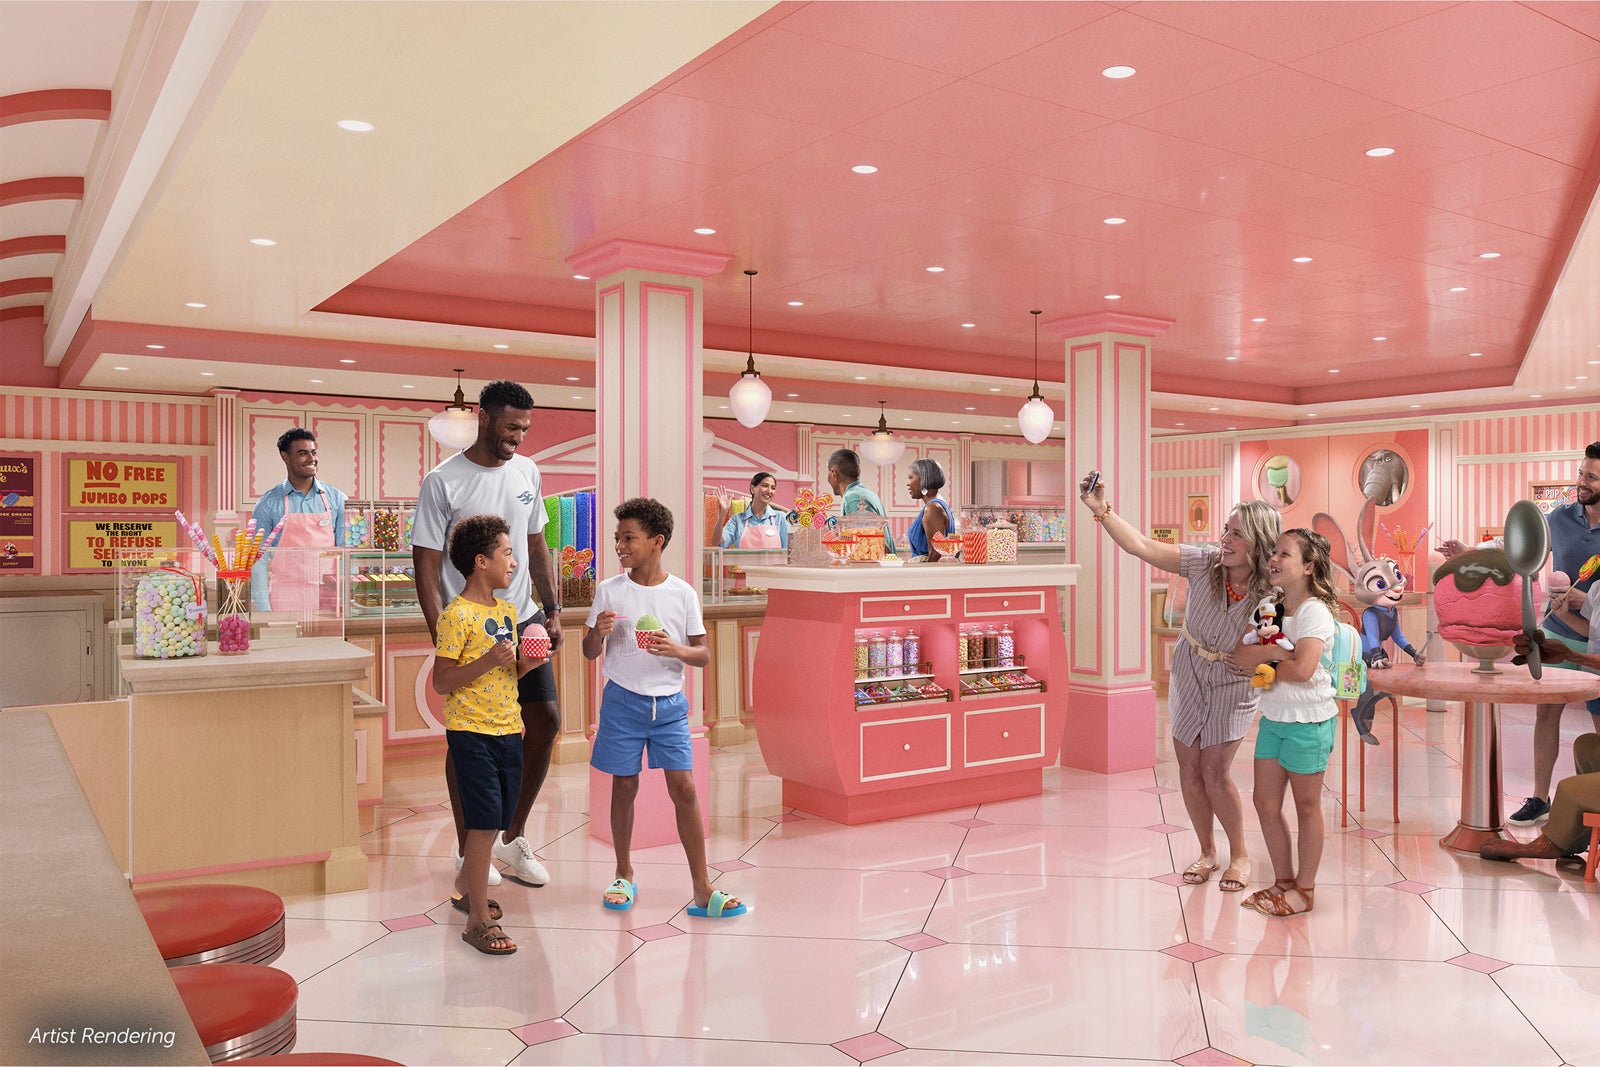 Artist's rendering of Jumbeaux's Sweets ice cream and candy shop.